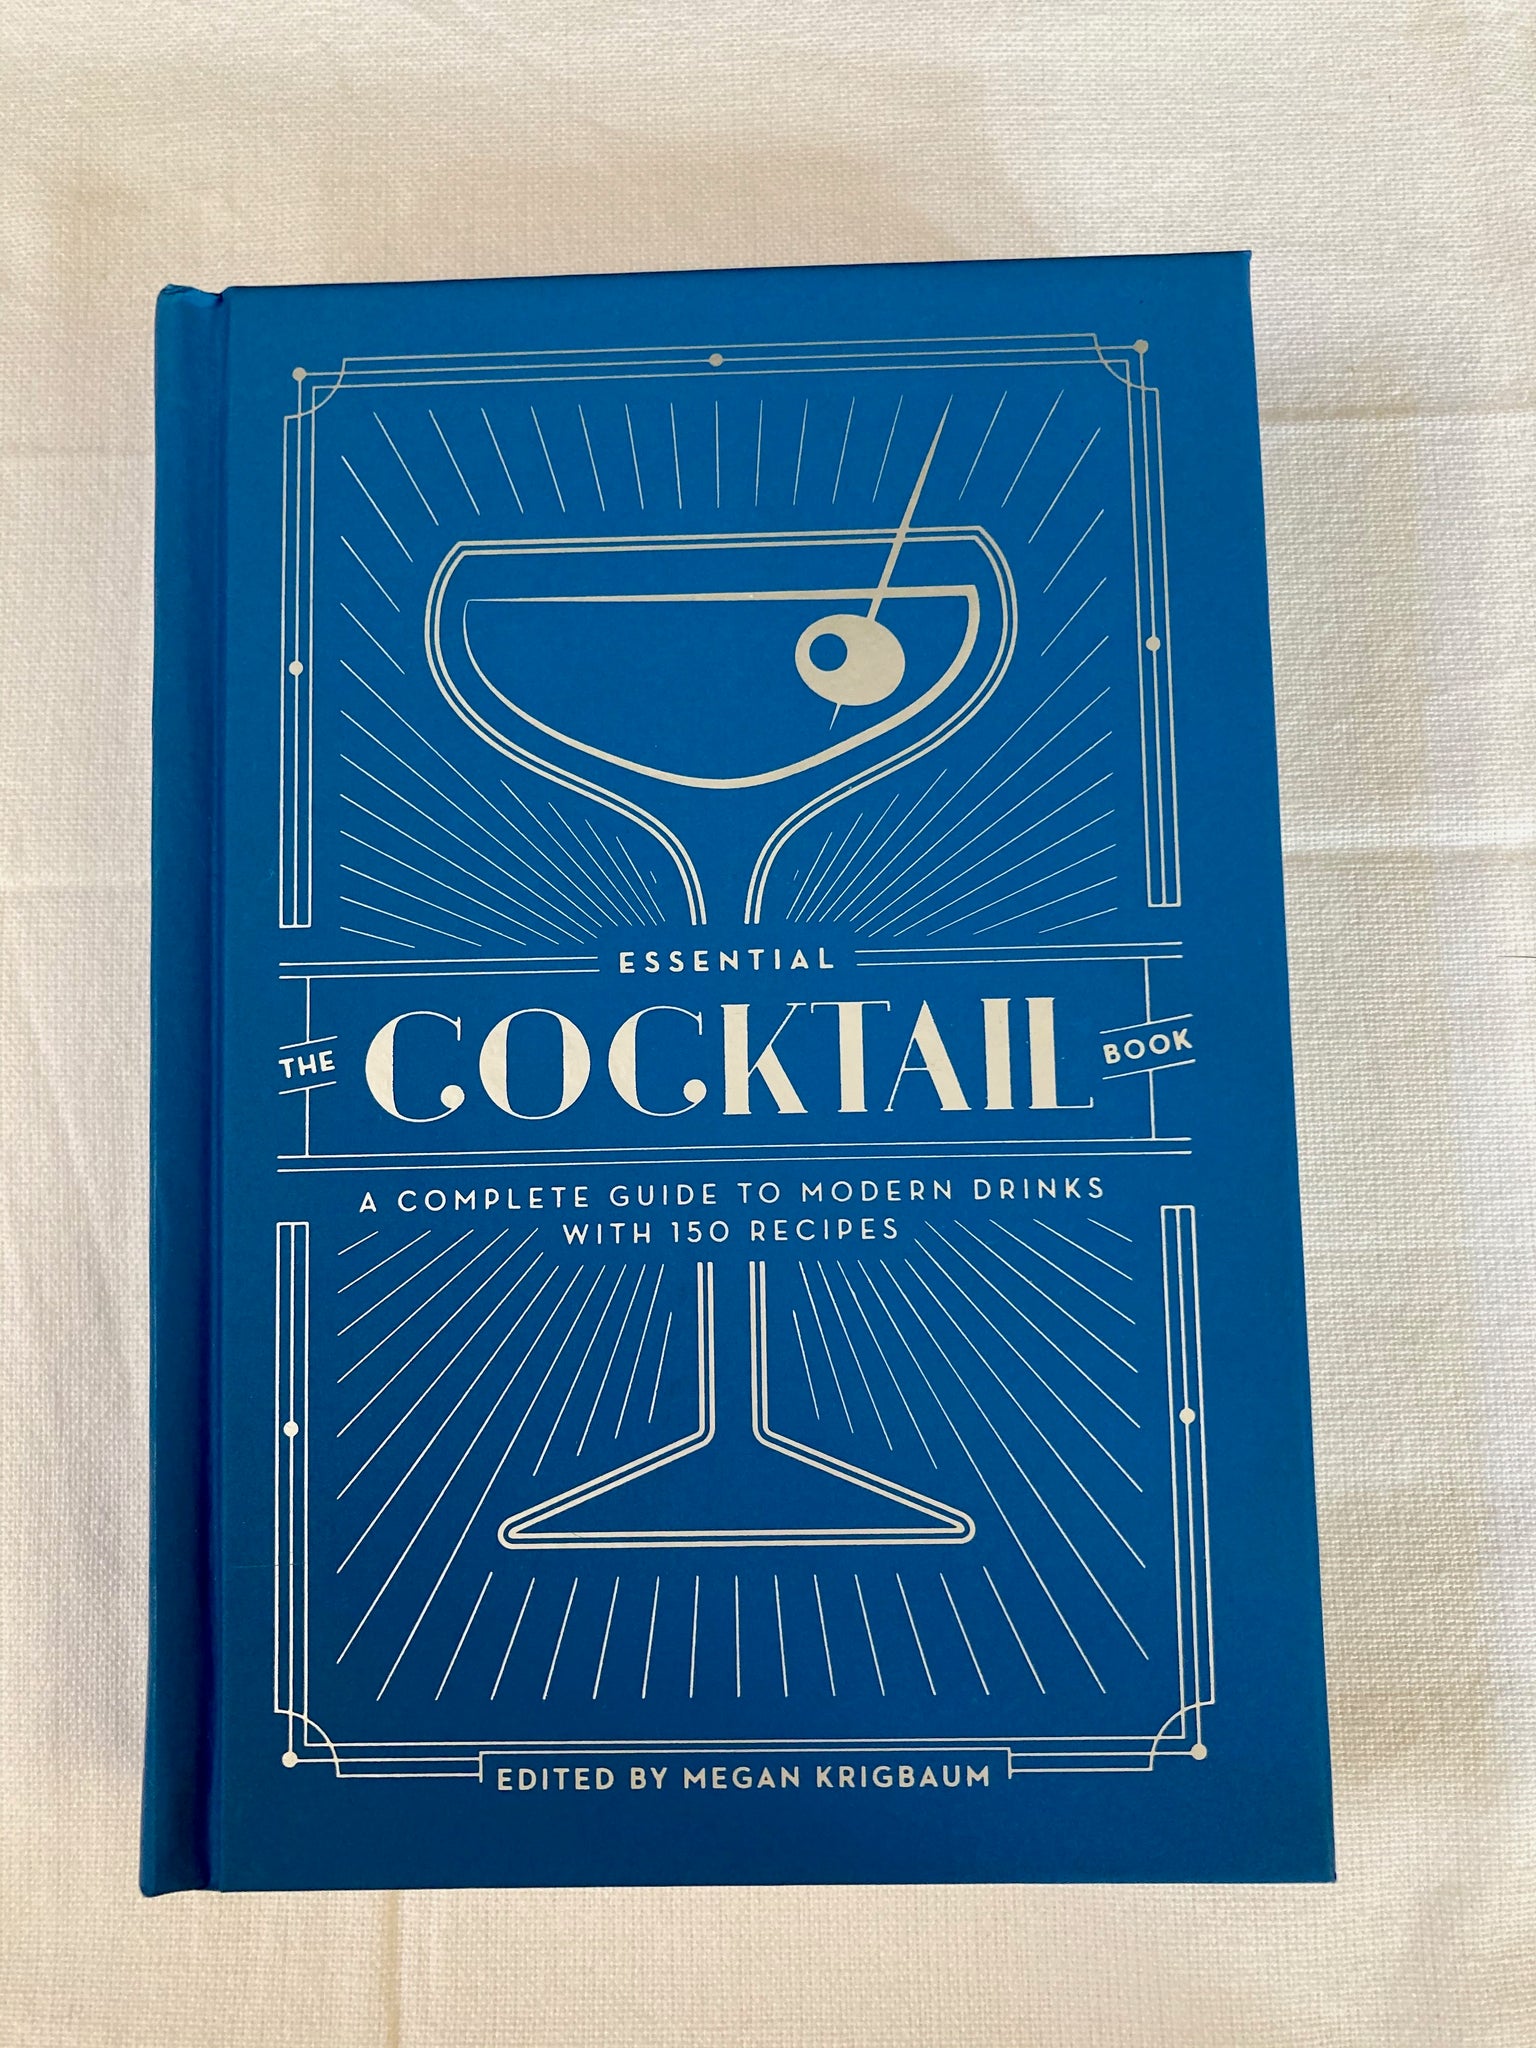 The Ultimate Guide to Cocktail Glasses